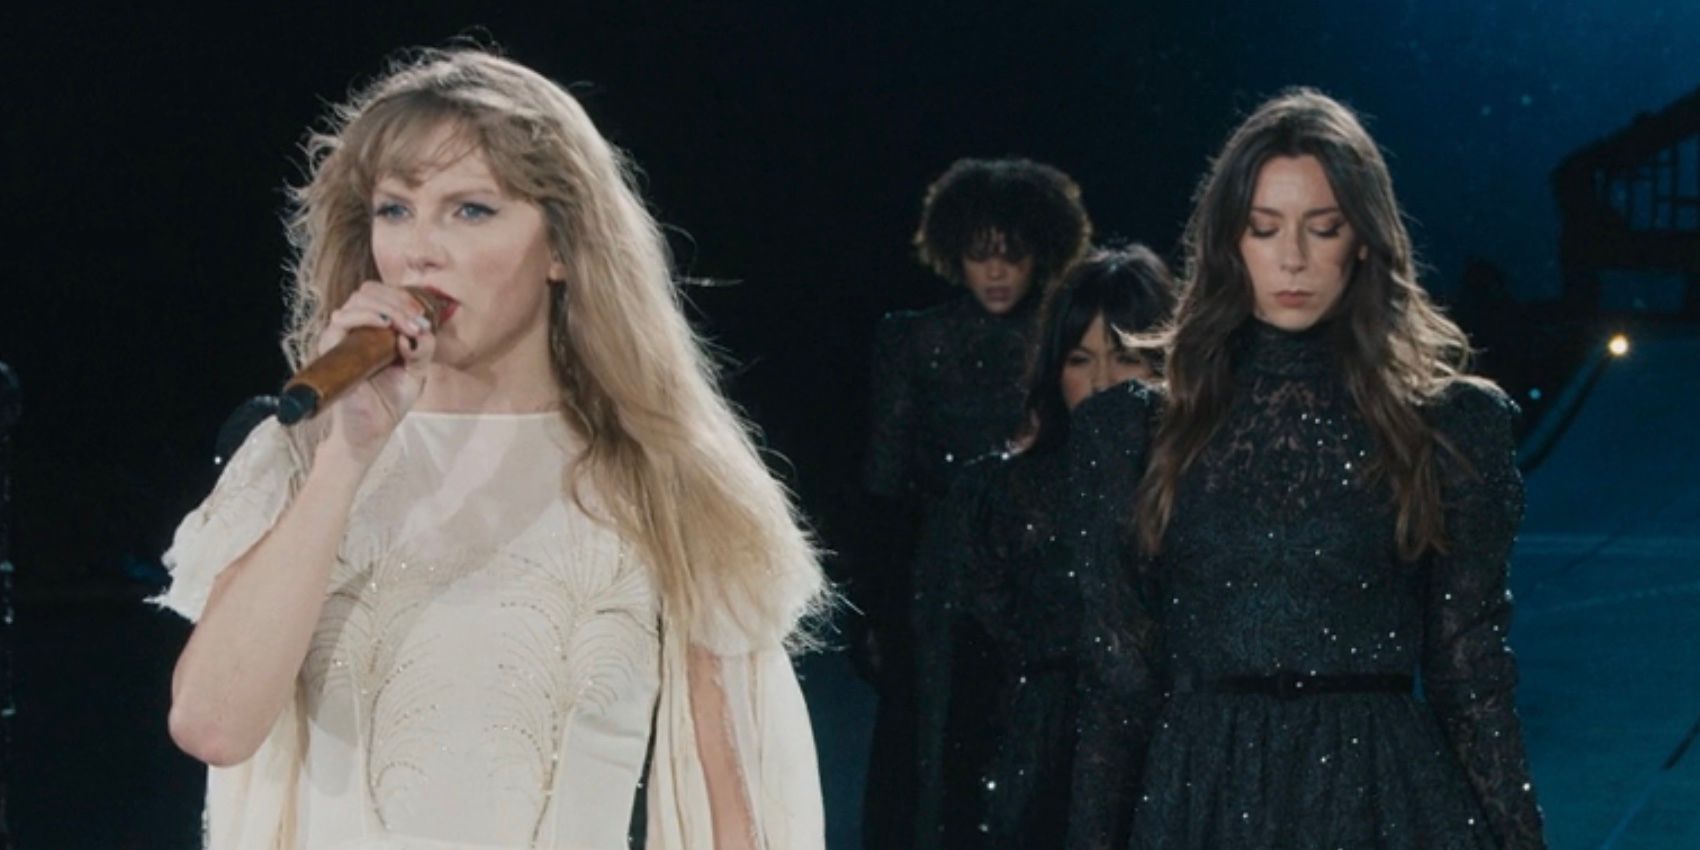 Taylor Swift performs "my rears ricochet" with backup dancer Audrey Douglass in The Eras Tour movie.